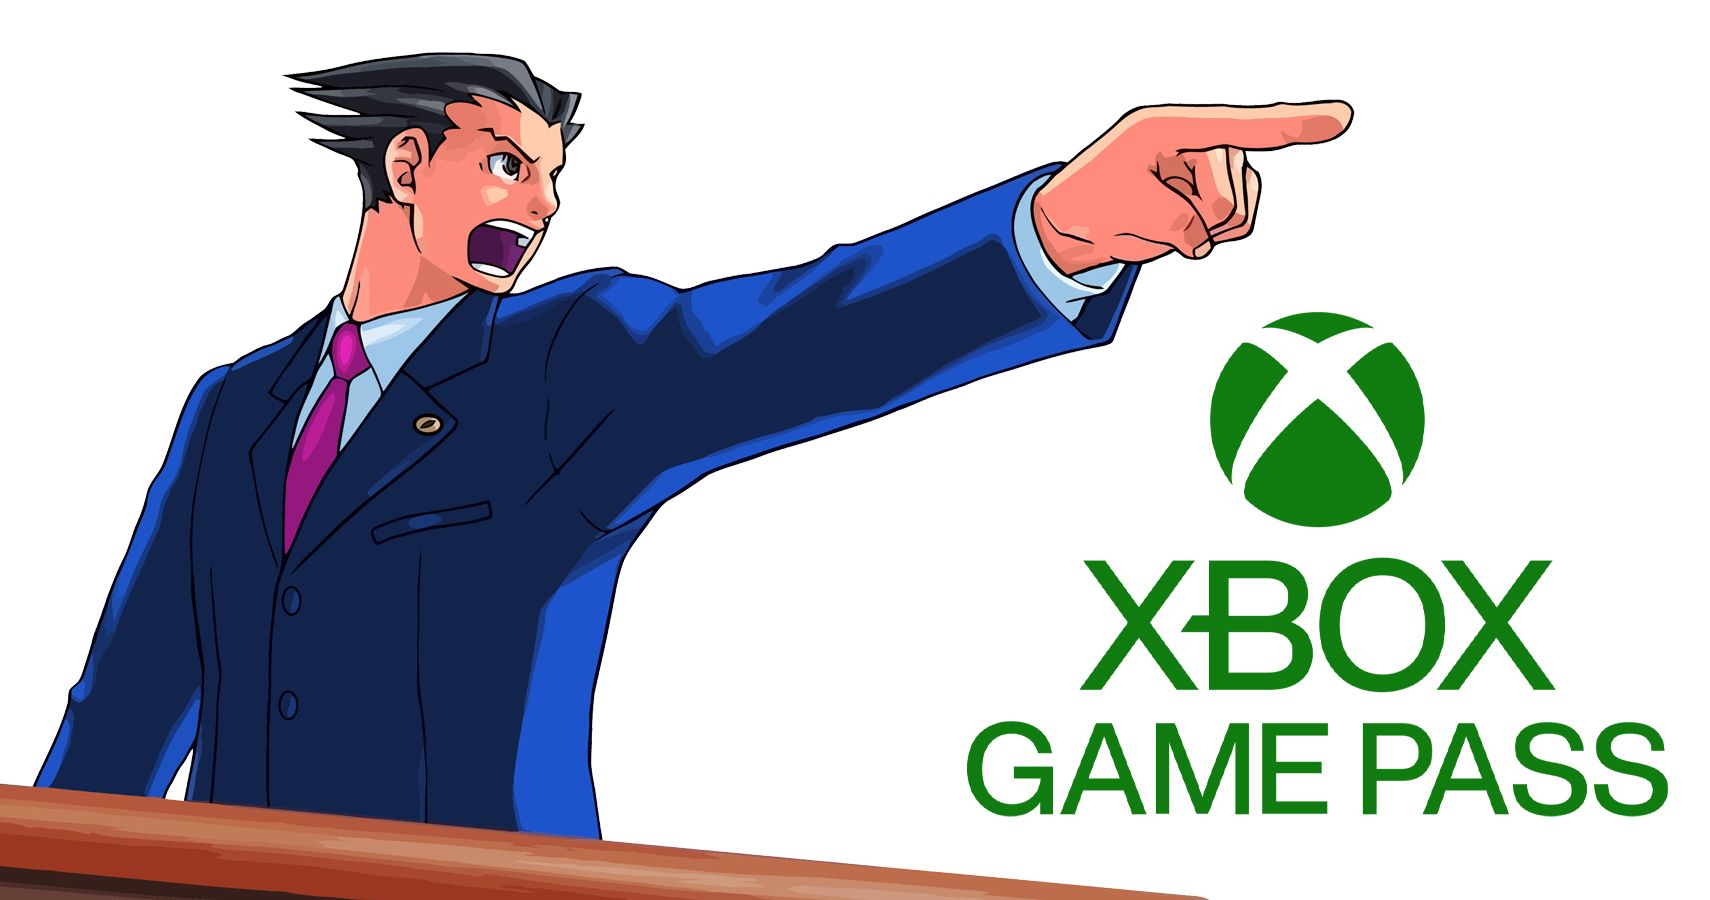 ace-attorney-trilogy-could-come-to-xbox-game-pass-in-near-future